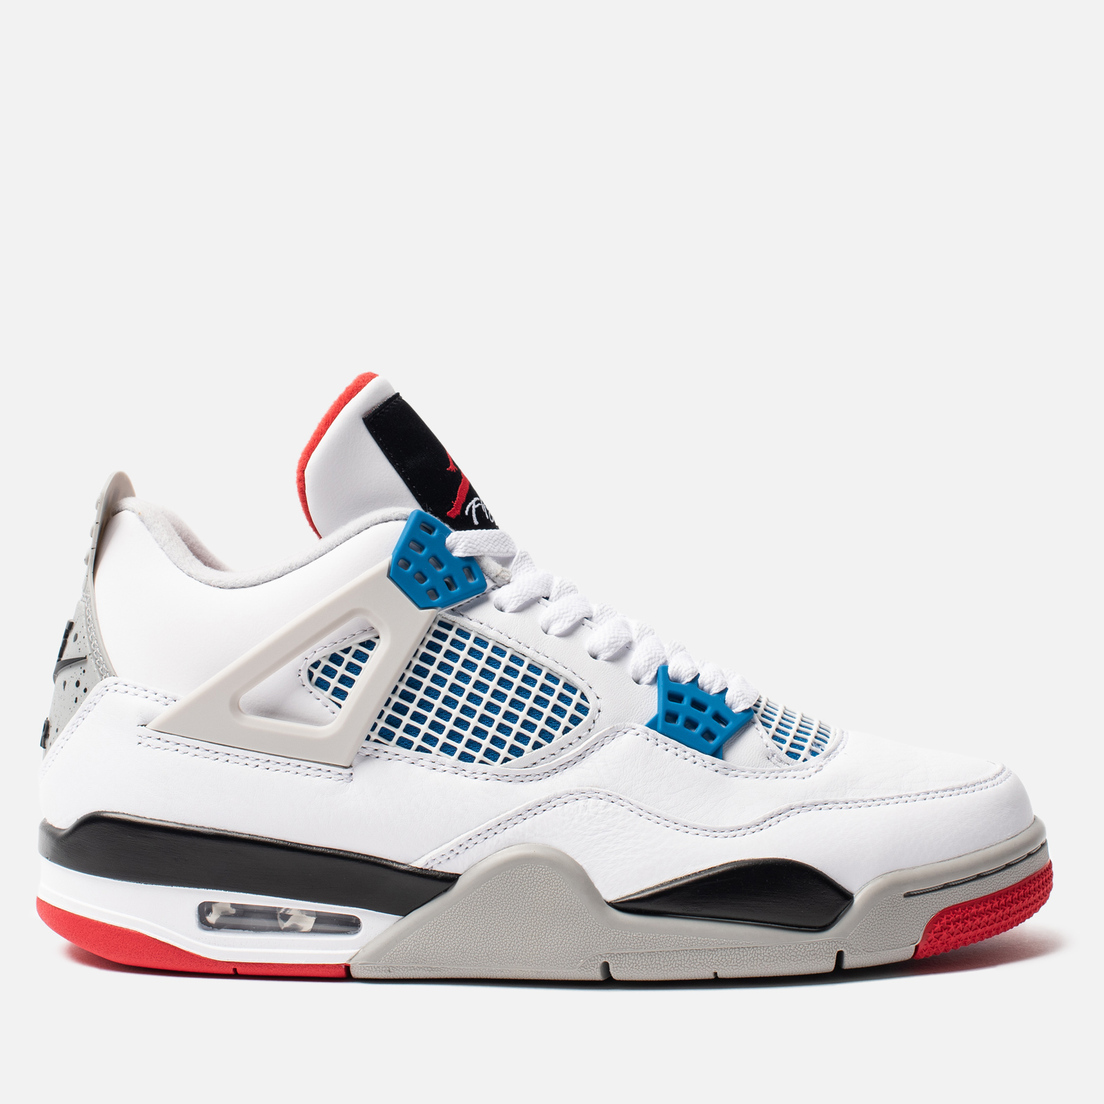 blue and red jordan 4s